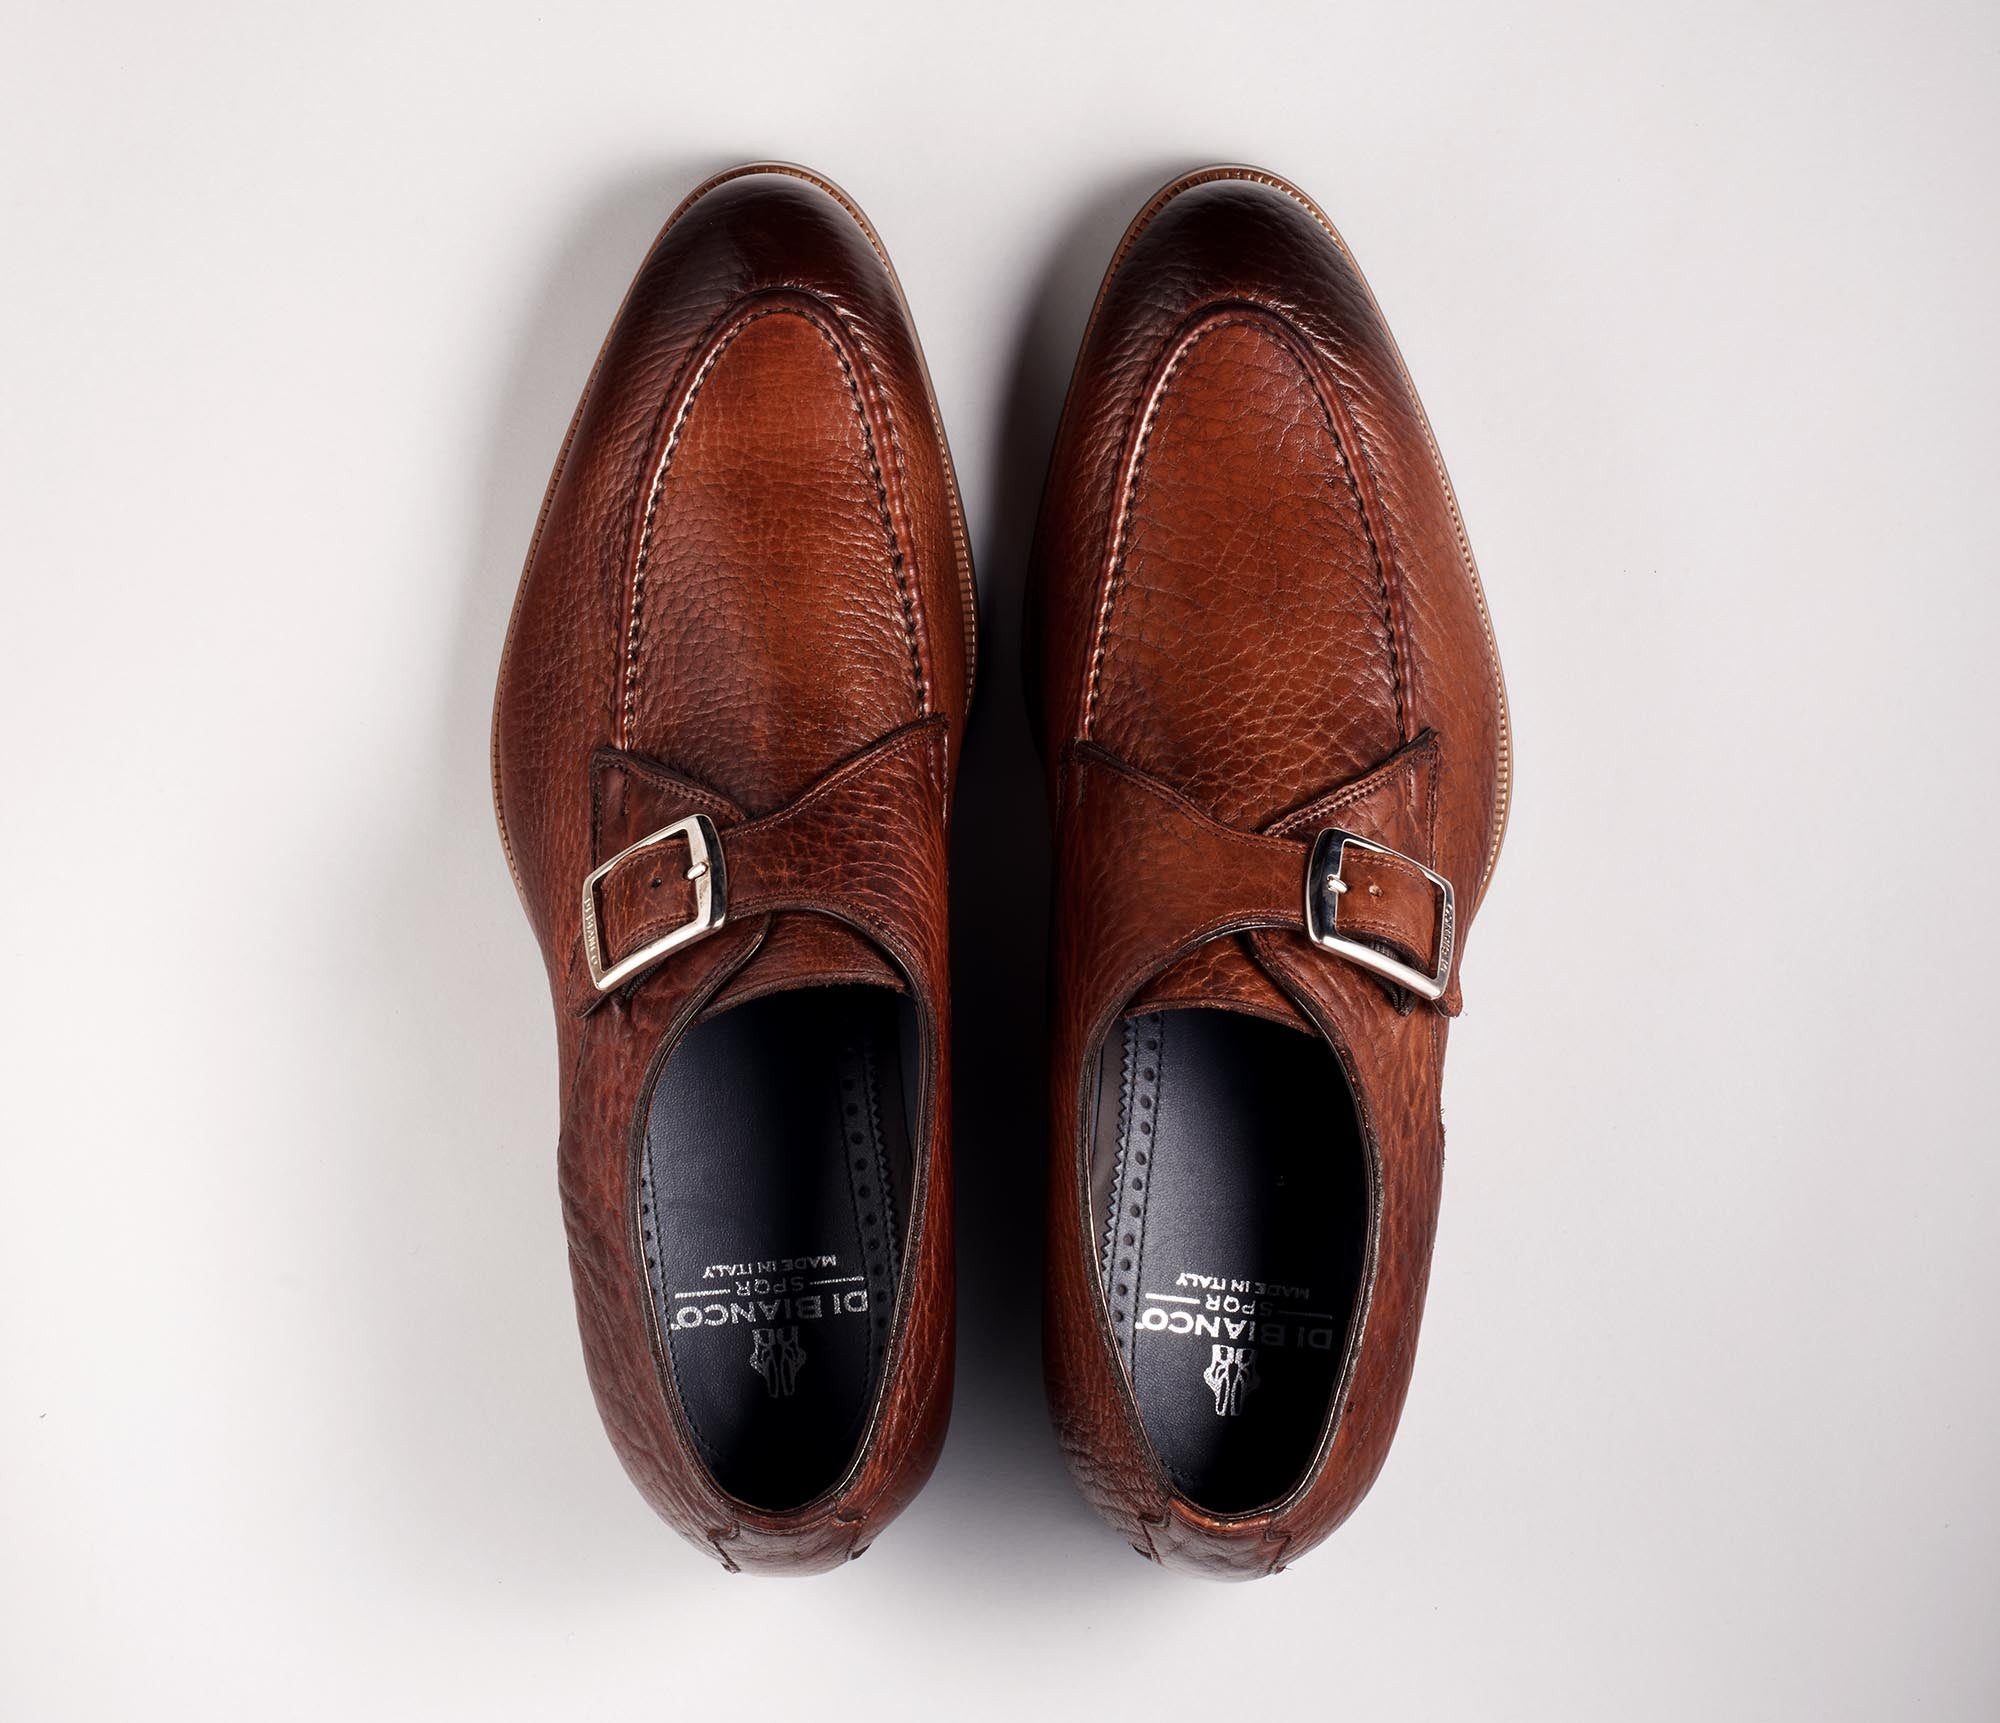 The Parma Tabacco Monk Strap Shoes - 11